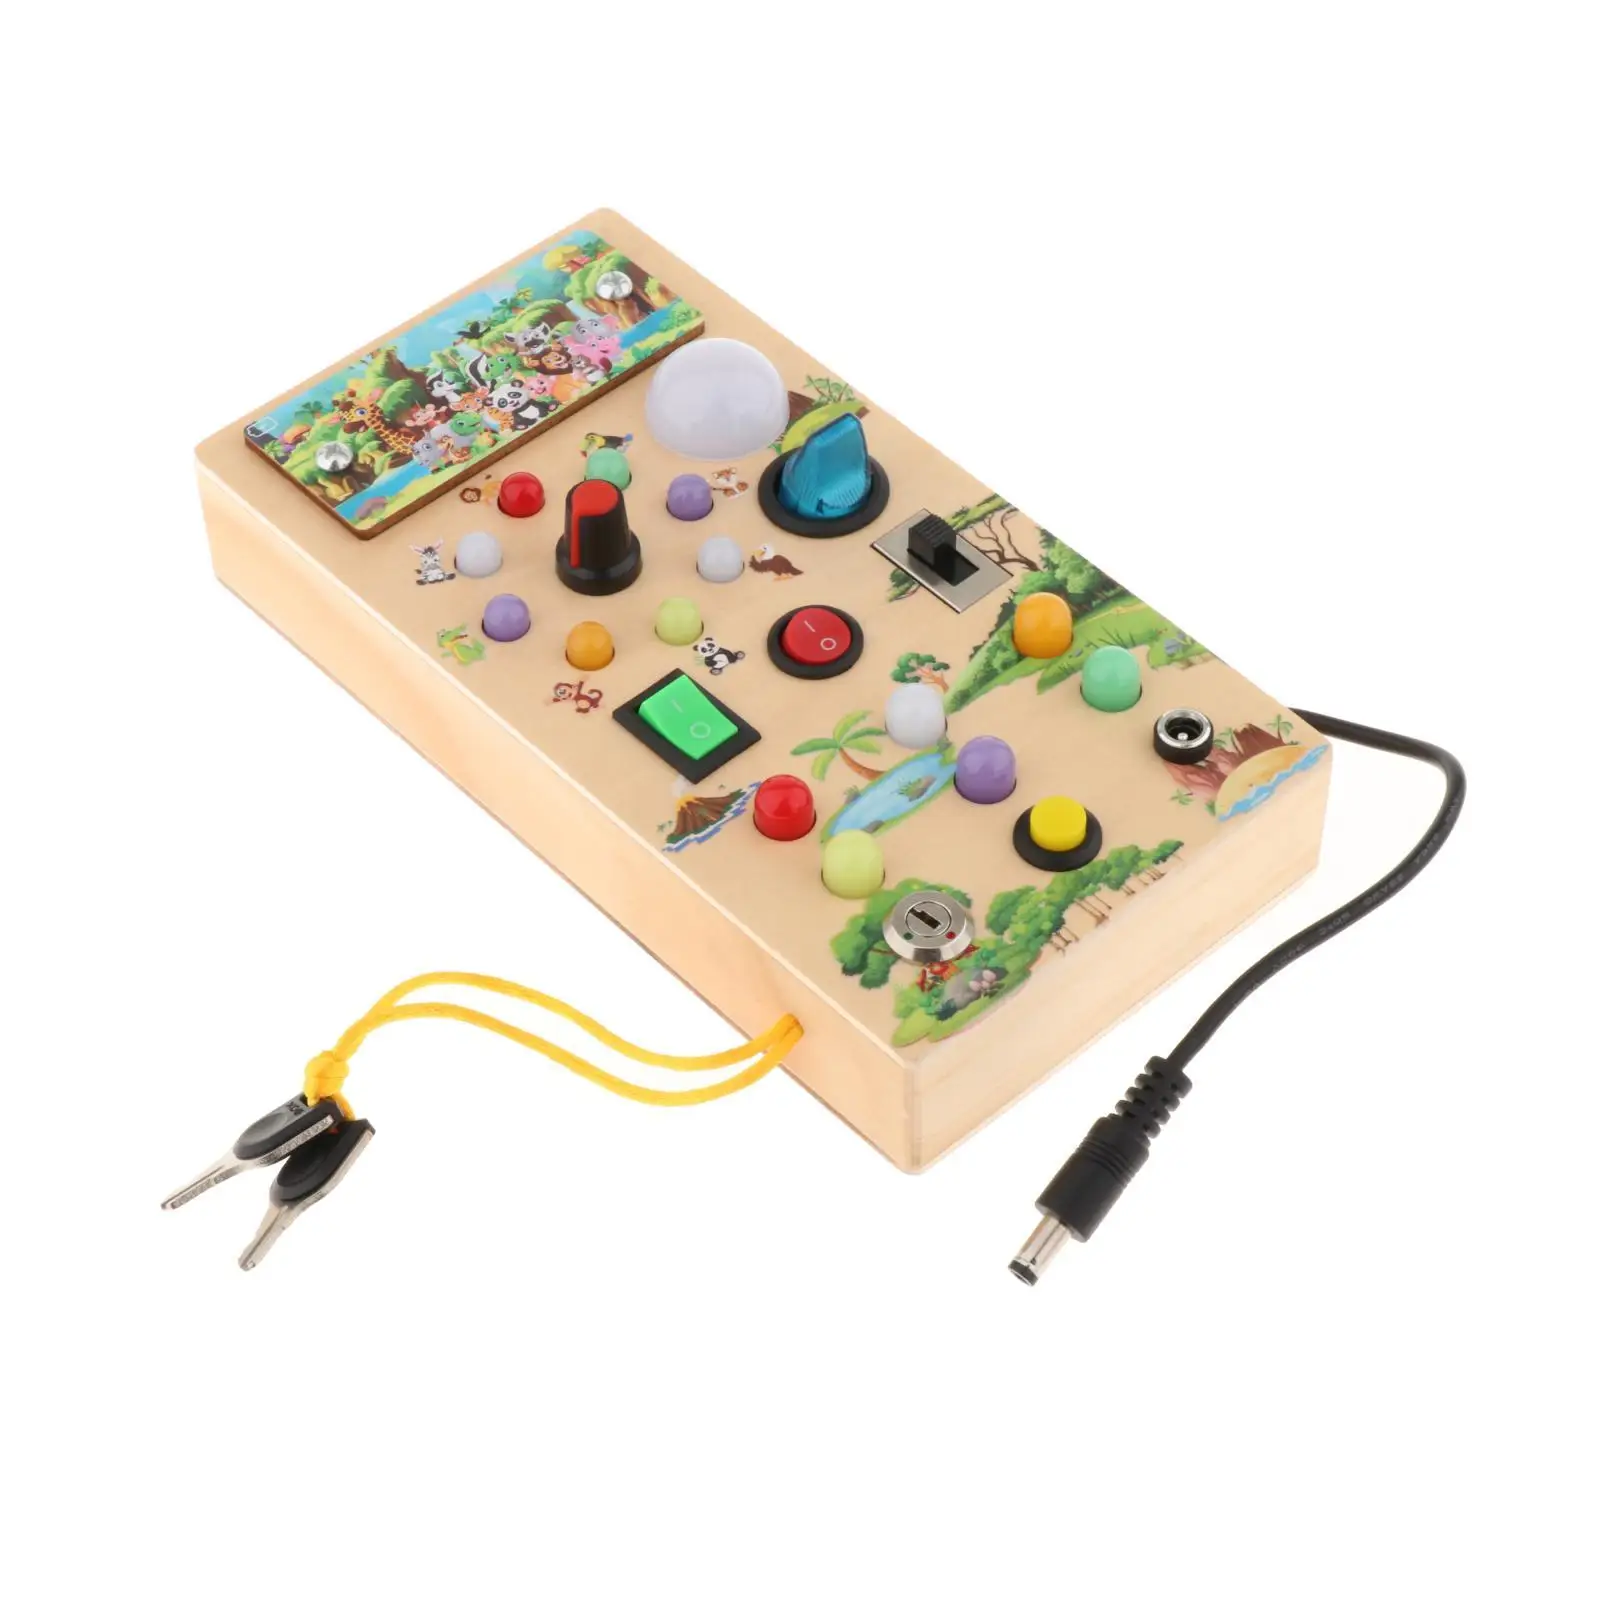 

Wooden Busy Board with LED Light Switches Developmental Toy Teaching Aids Early Education for 1-3 Children Kids Birthday Gifts